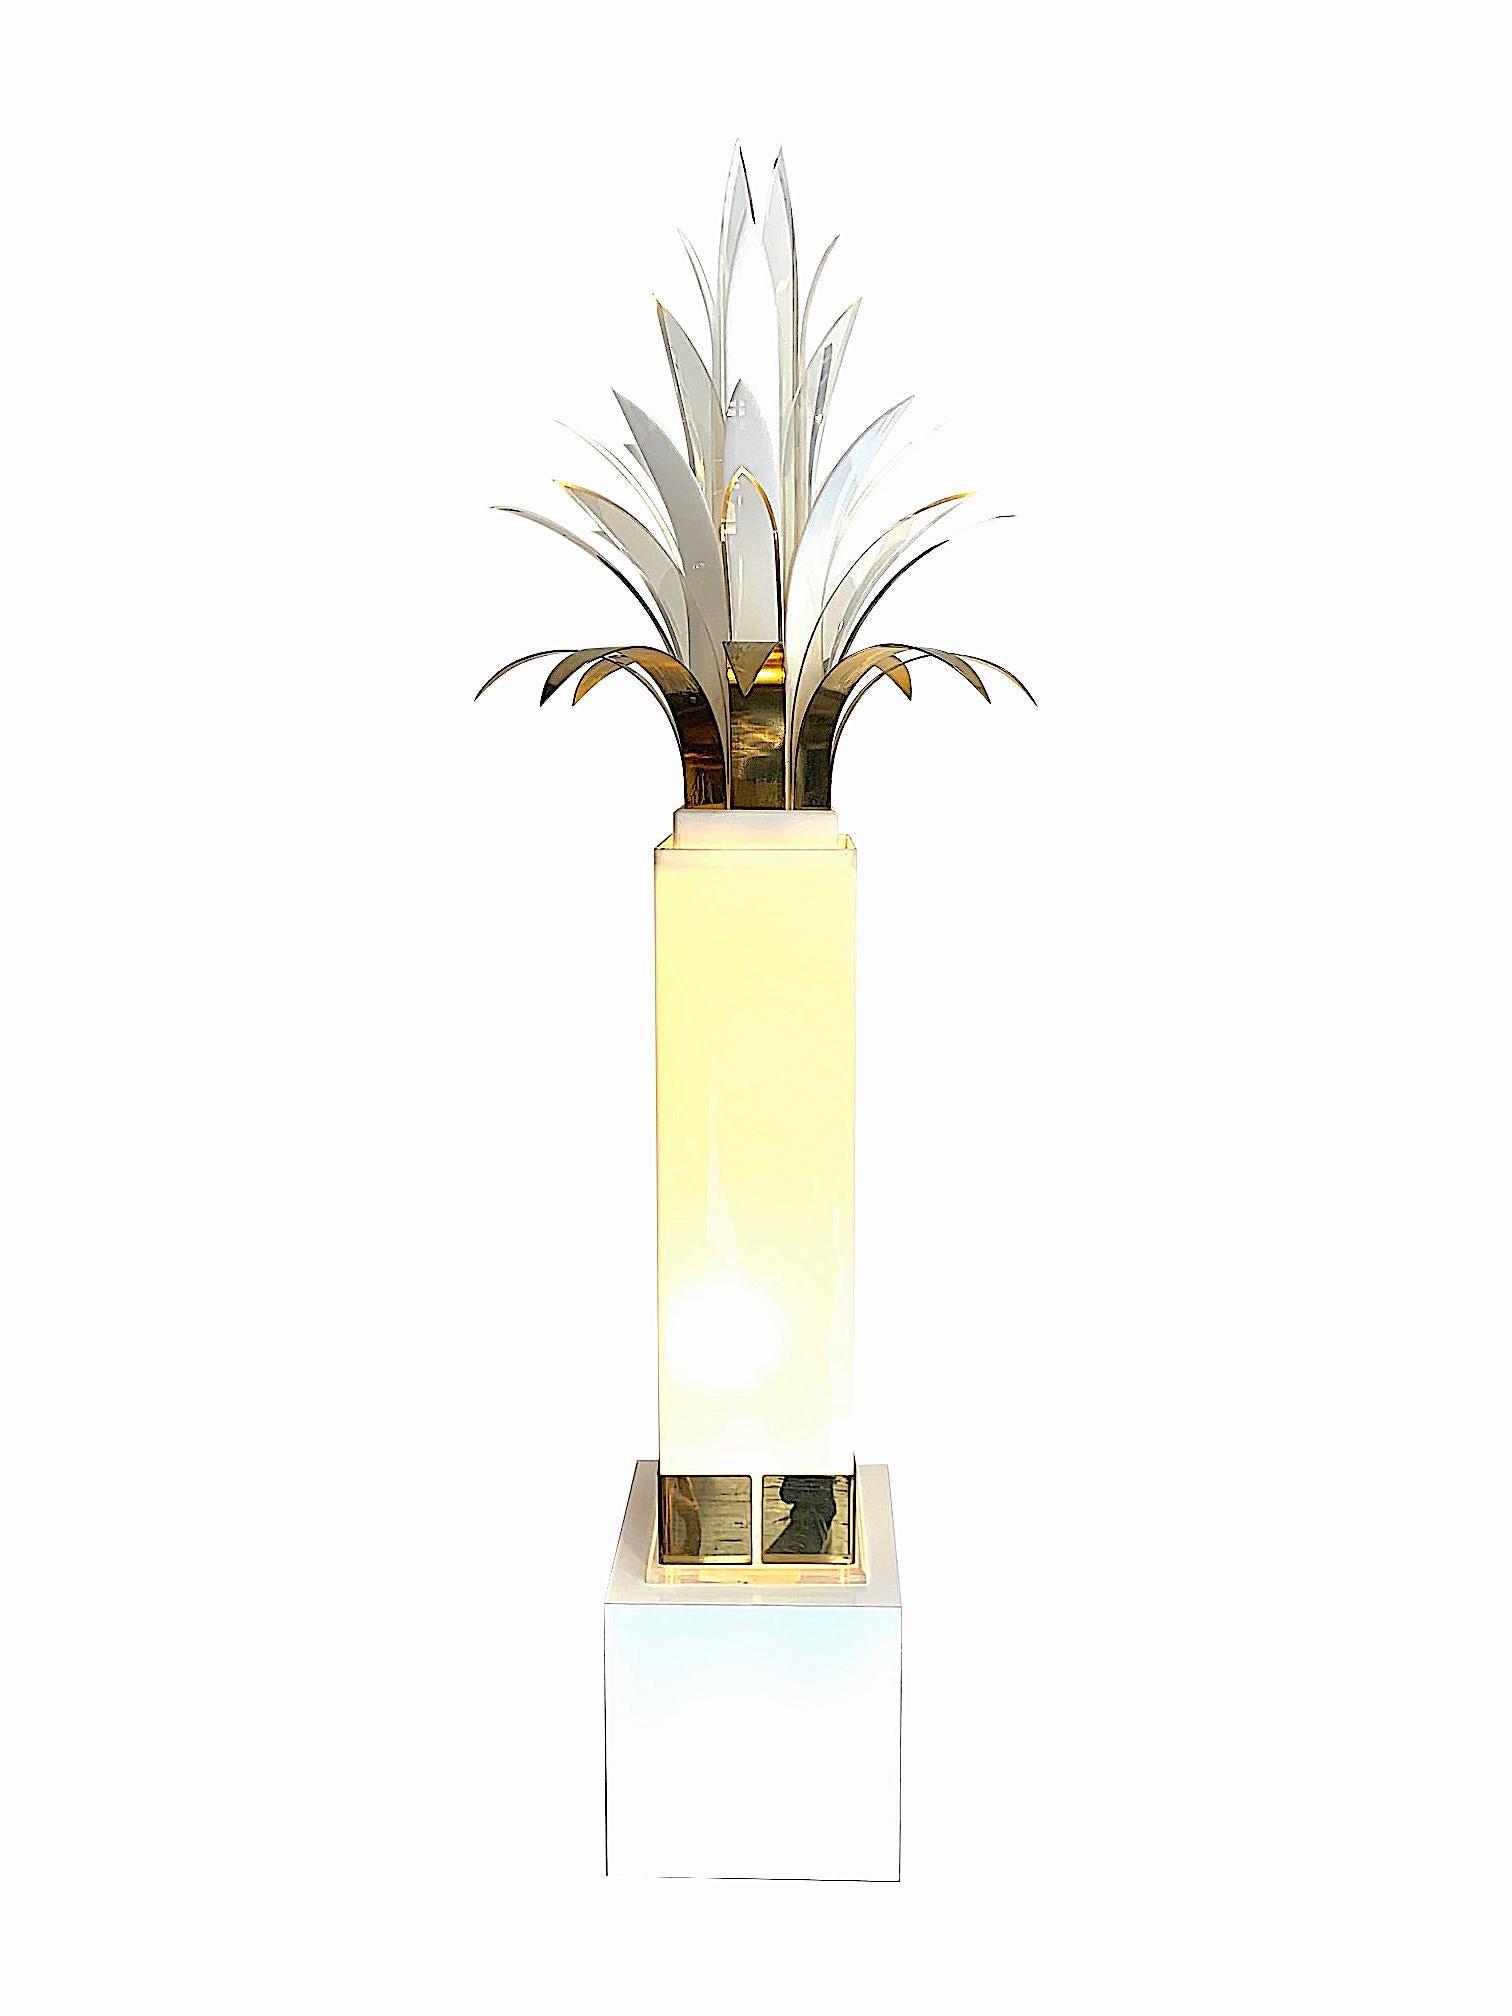 Rare Stunning 1970s Palm Tree Floor Lamp by Peter Doff for Berger Designs 1